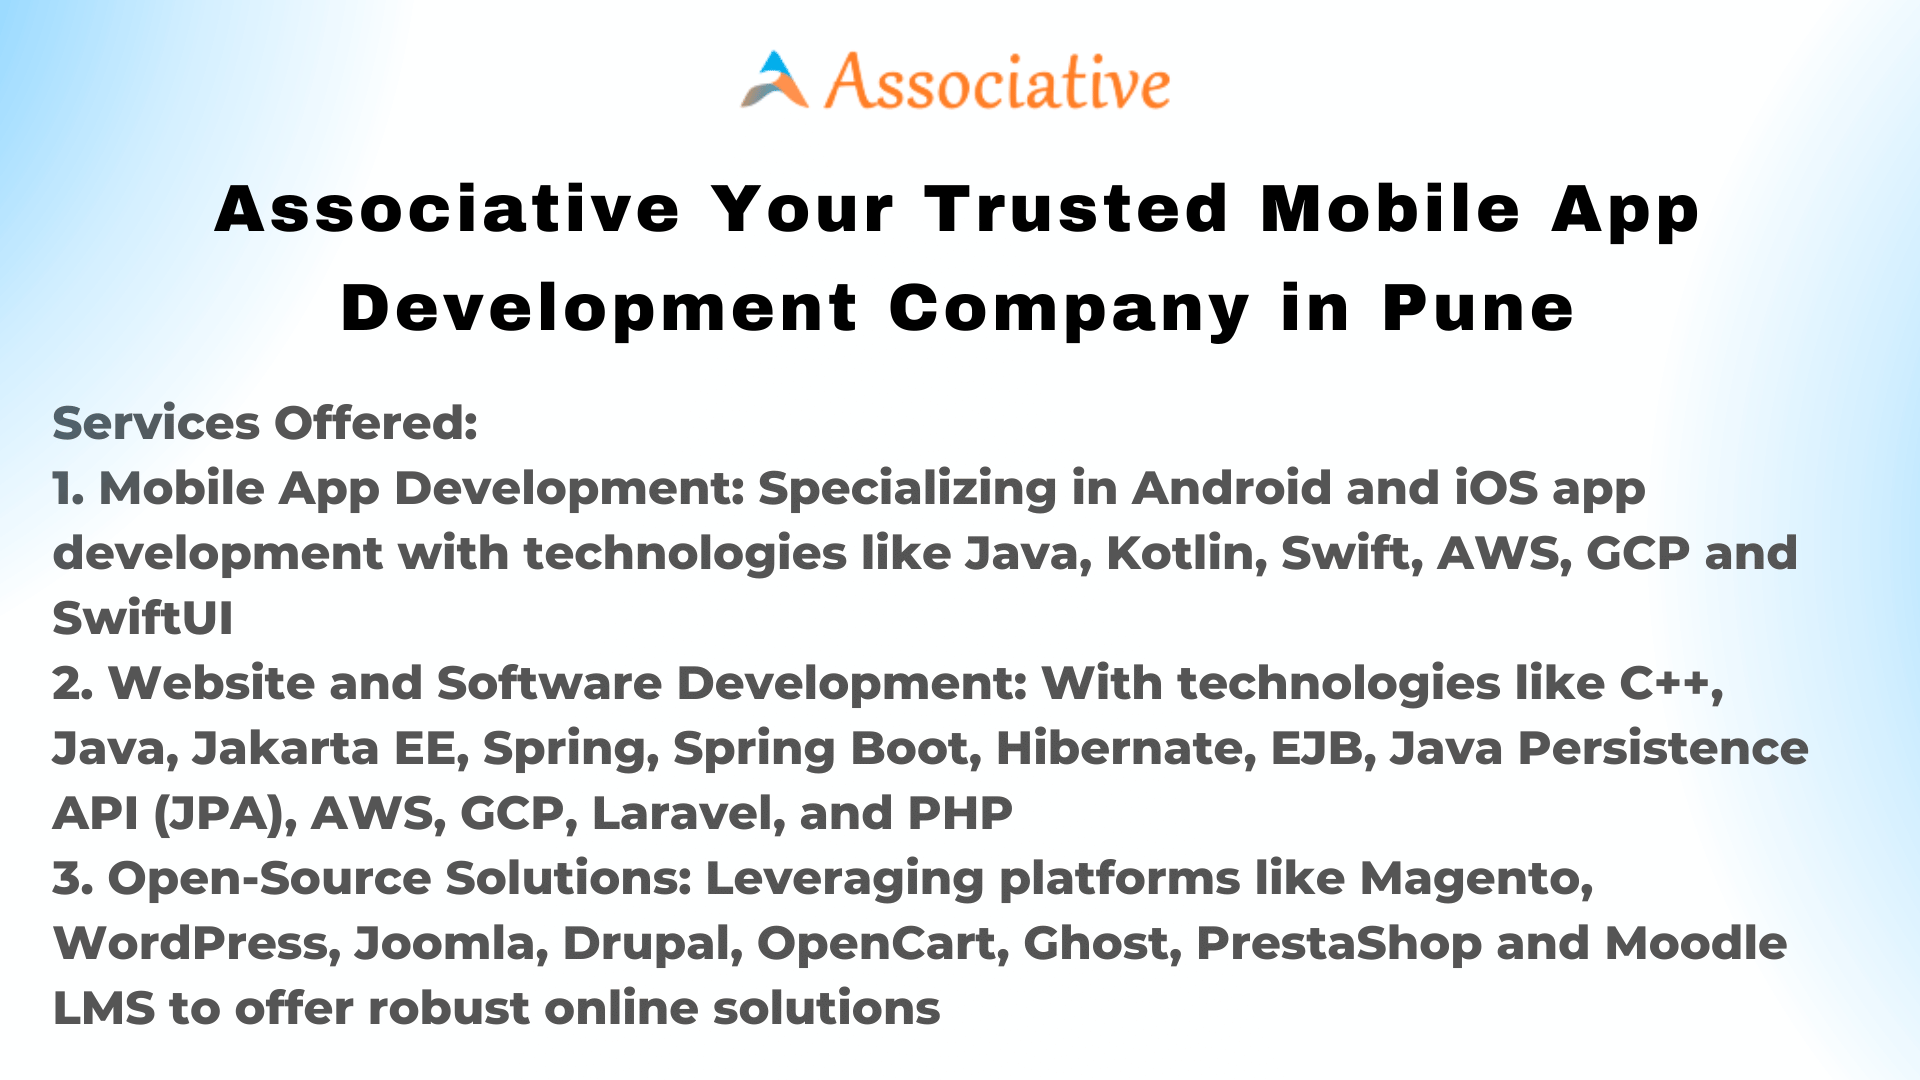 Associative Your Trusted Mobile App Development Company in Pune